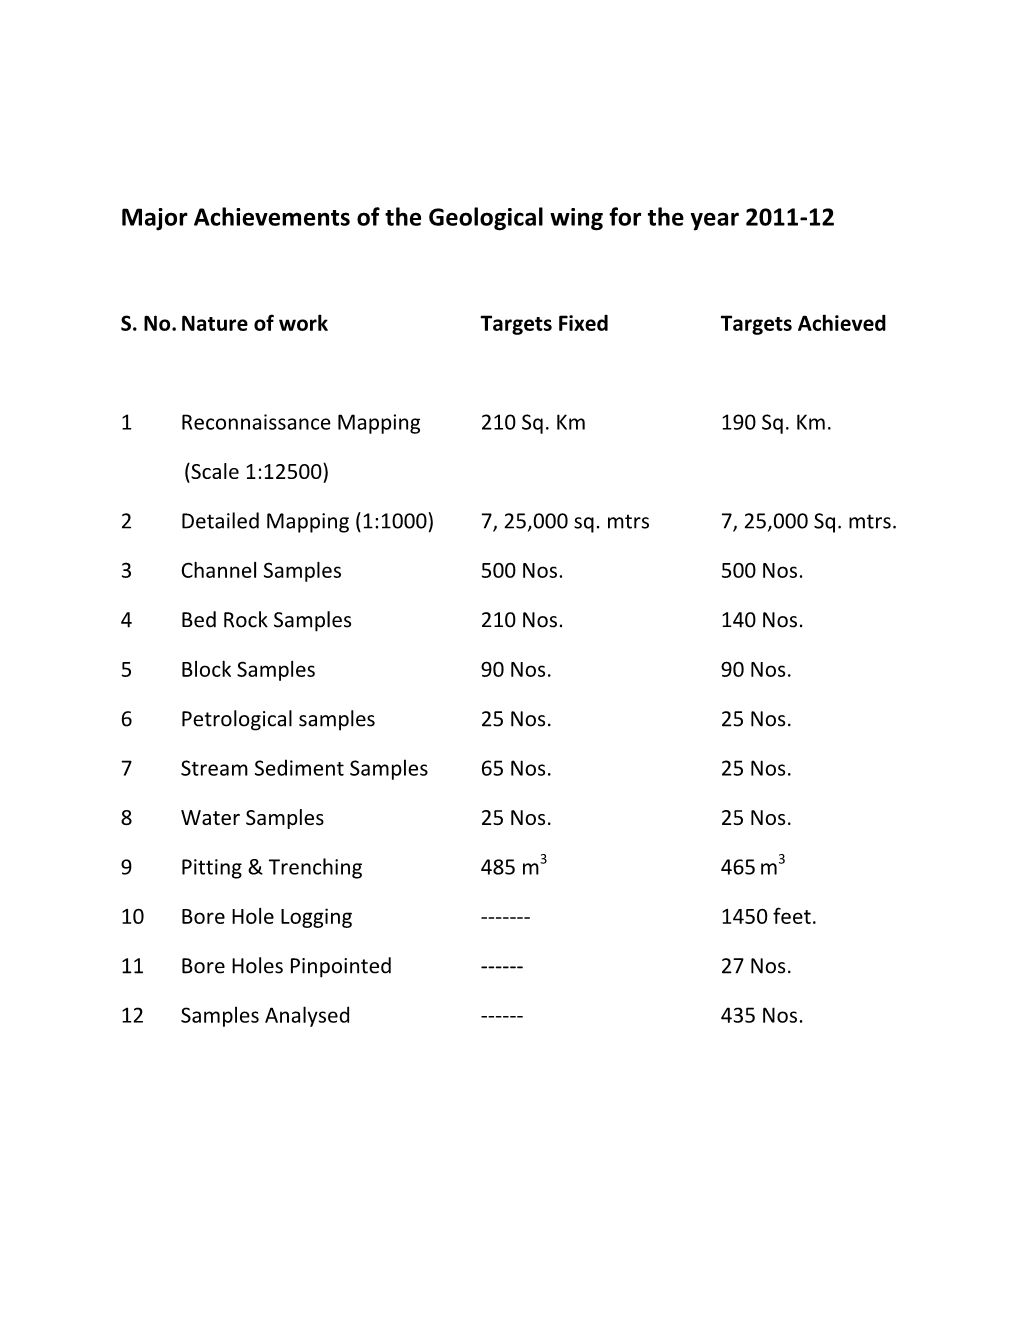 Major Achievements of the Geological Wing for the Year 2011-12